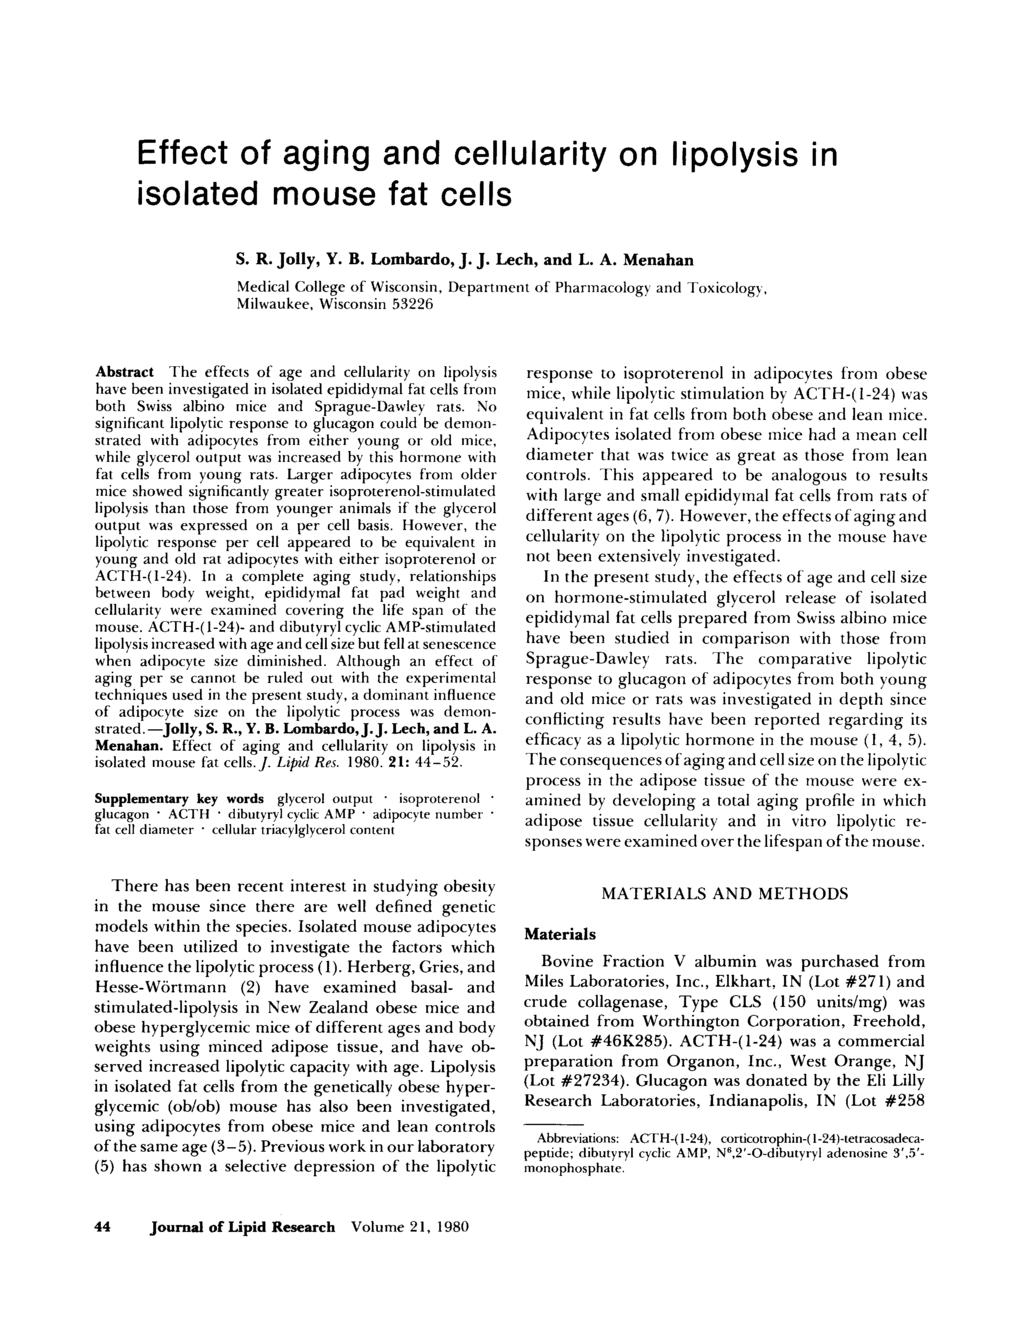 Effect of aging and cellularity on lipolysis in isolated mouse fat cells S. R. Jolly, Y. B. Lombardo, J. J. Lech, and L. A.